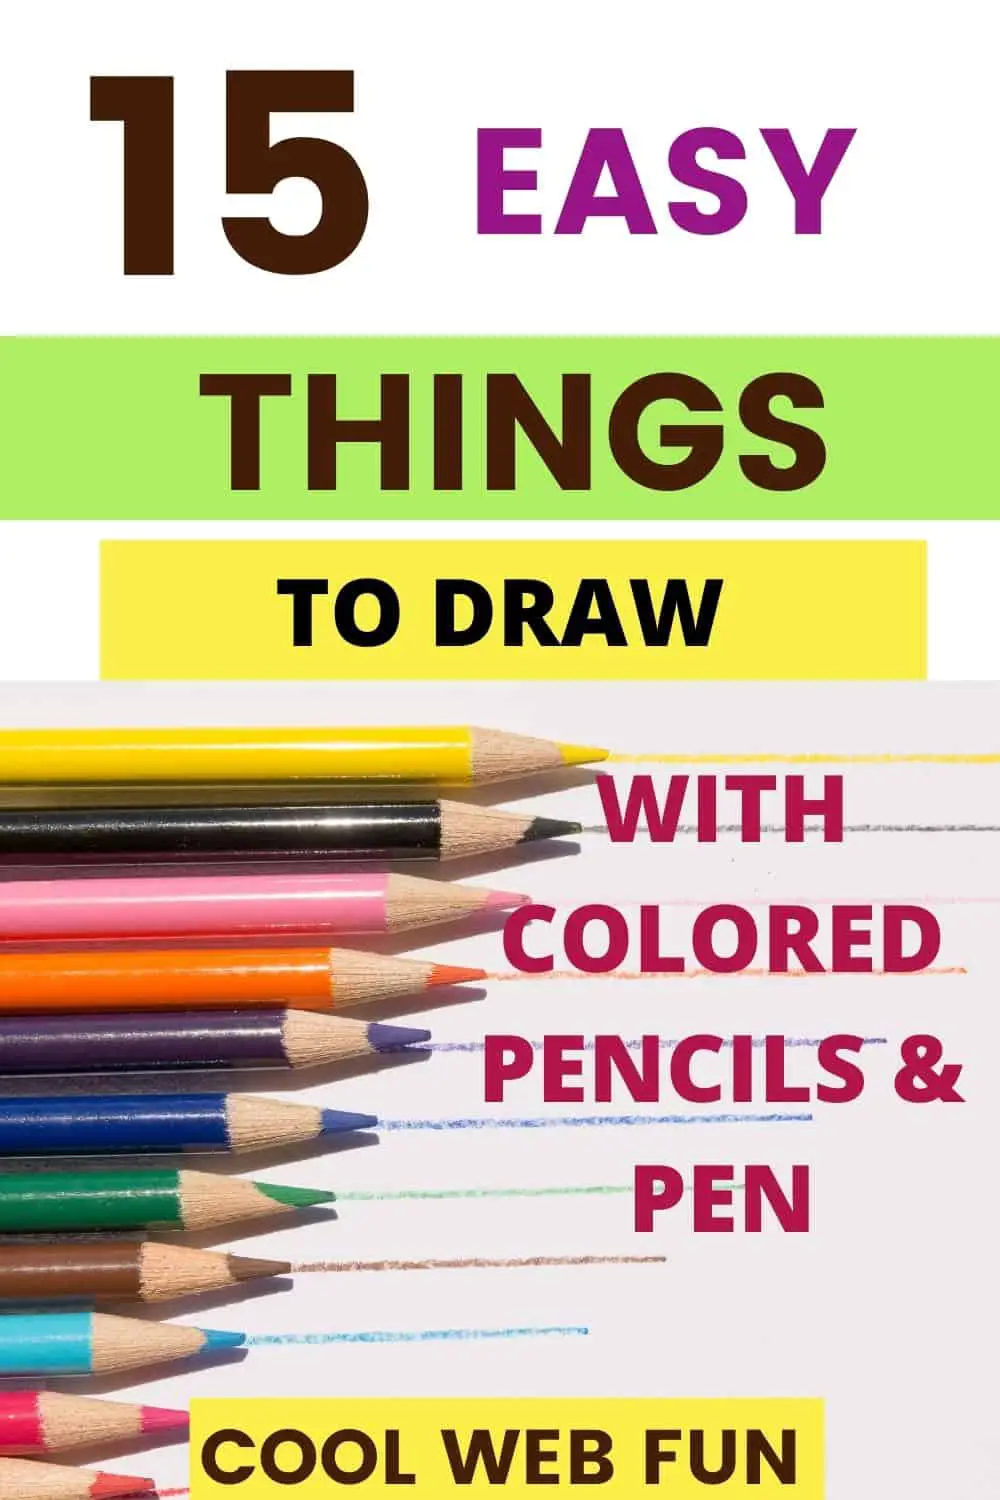 Easy Things to Draw